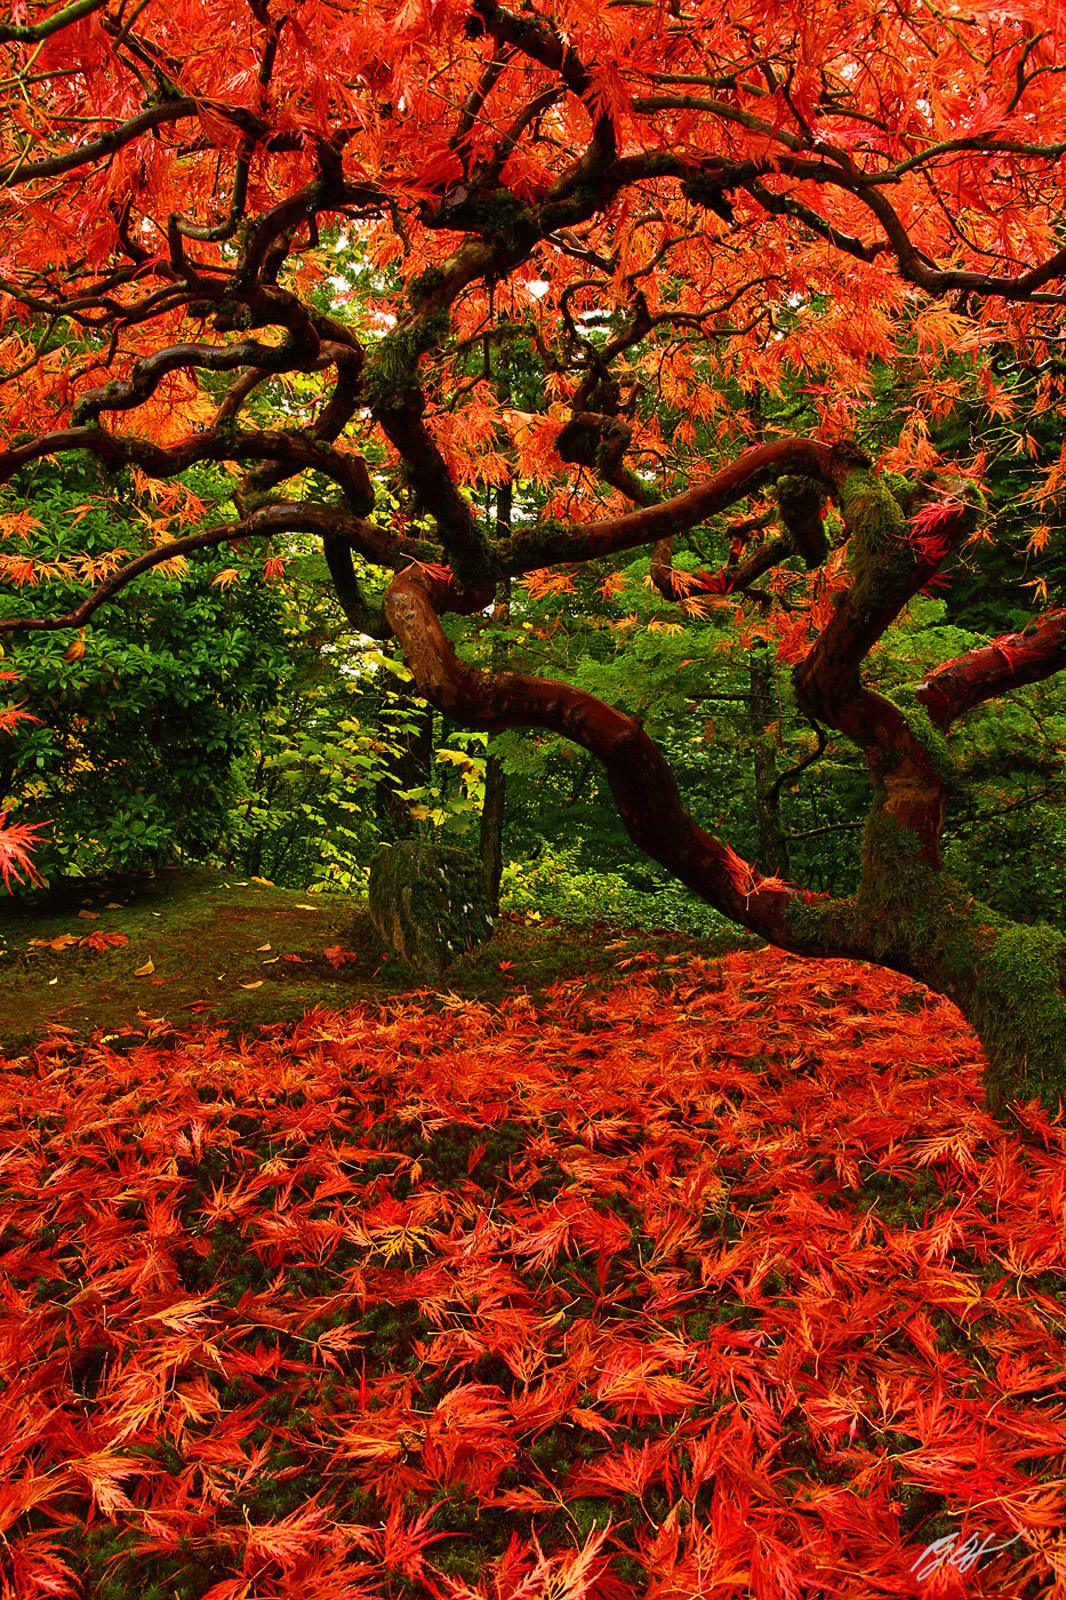 Japanese Maple Showing Off its Fall Color in the Portland Japanese Garden in Oregon